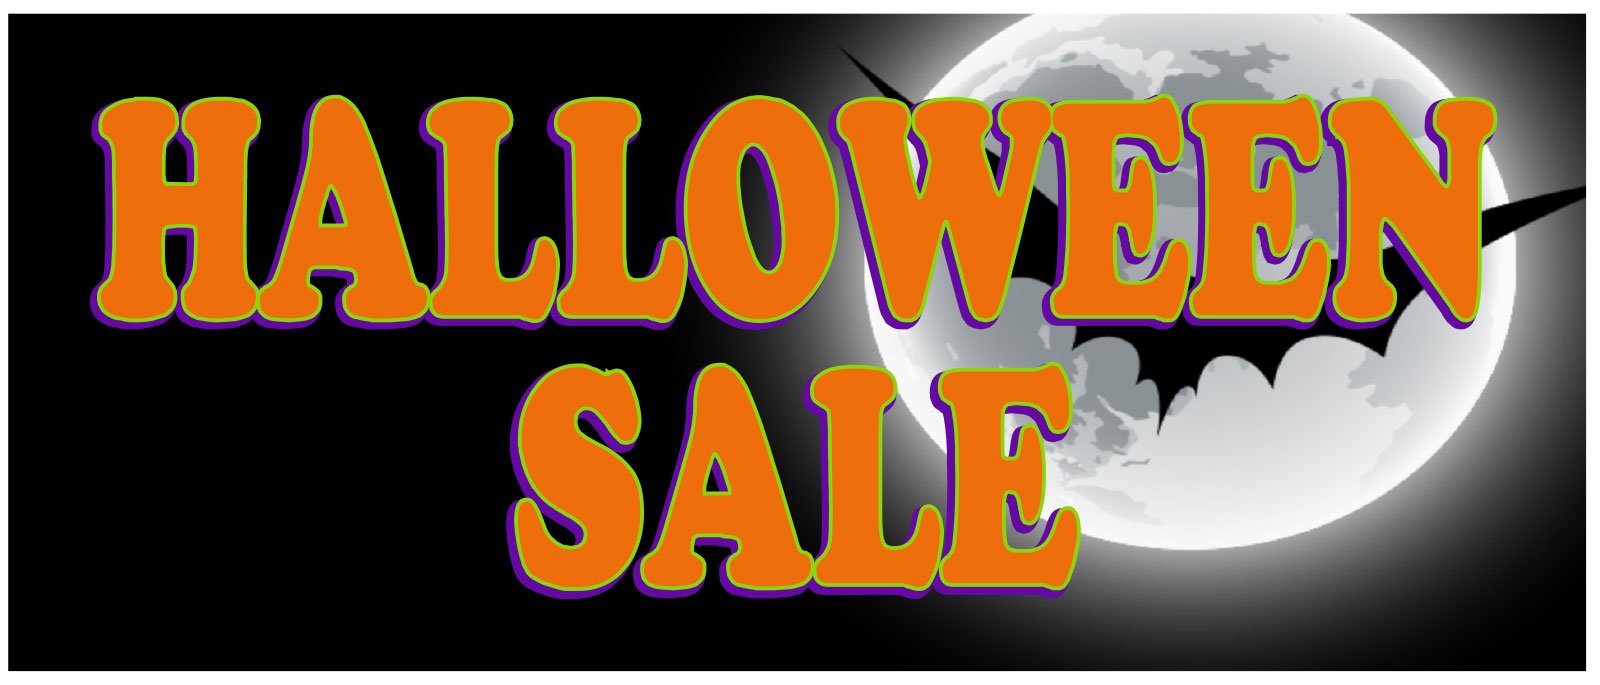 7Steroids Store News Image Halloween Sales - 40% OFF!